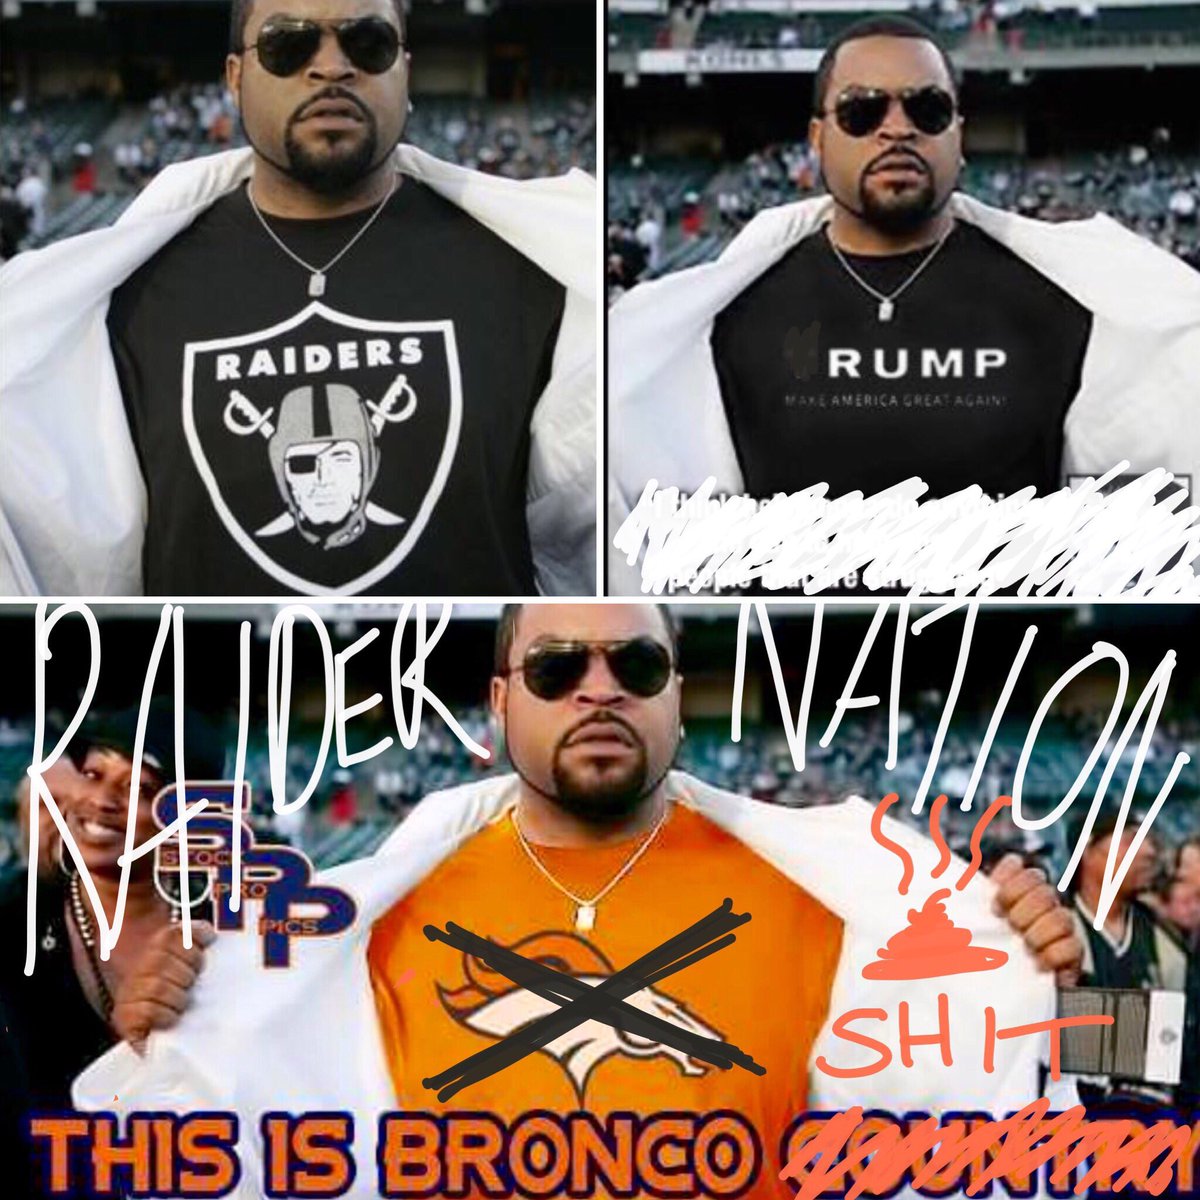 Didn't realize Broncos fans & Trump supporters has so much in common. Don't Believe the Hype. Vote Raiders! https://t.co/VphHZzplOn